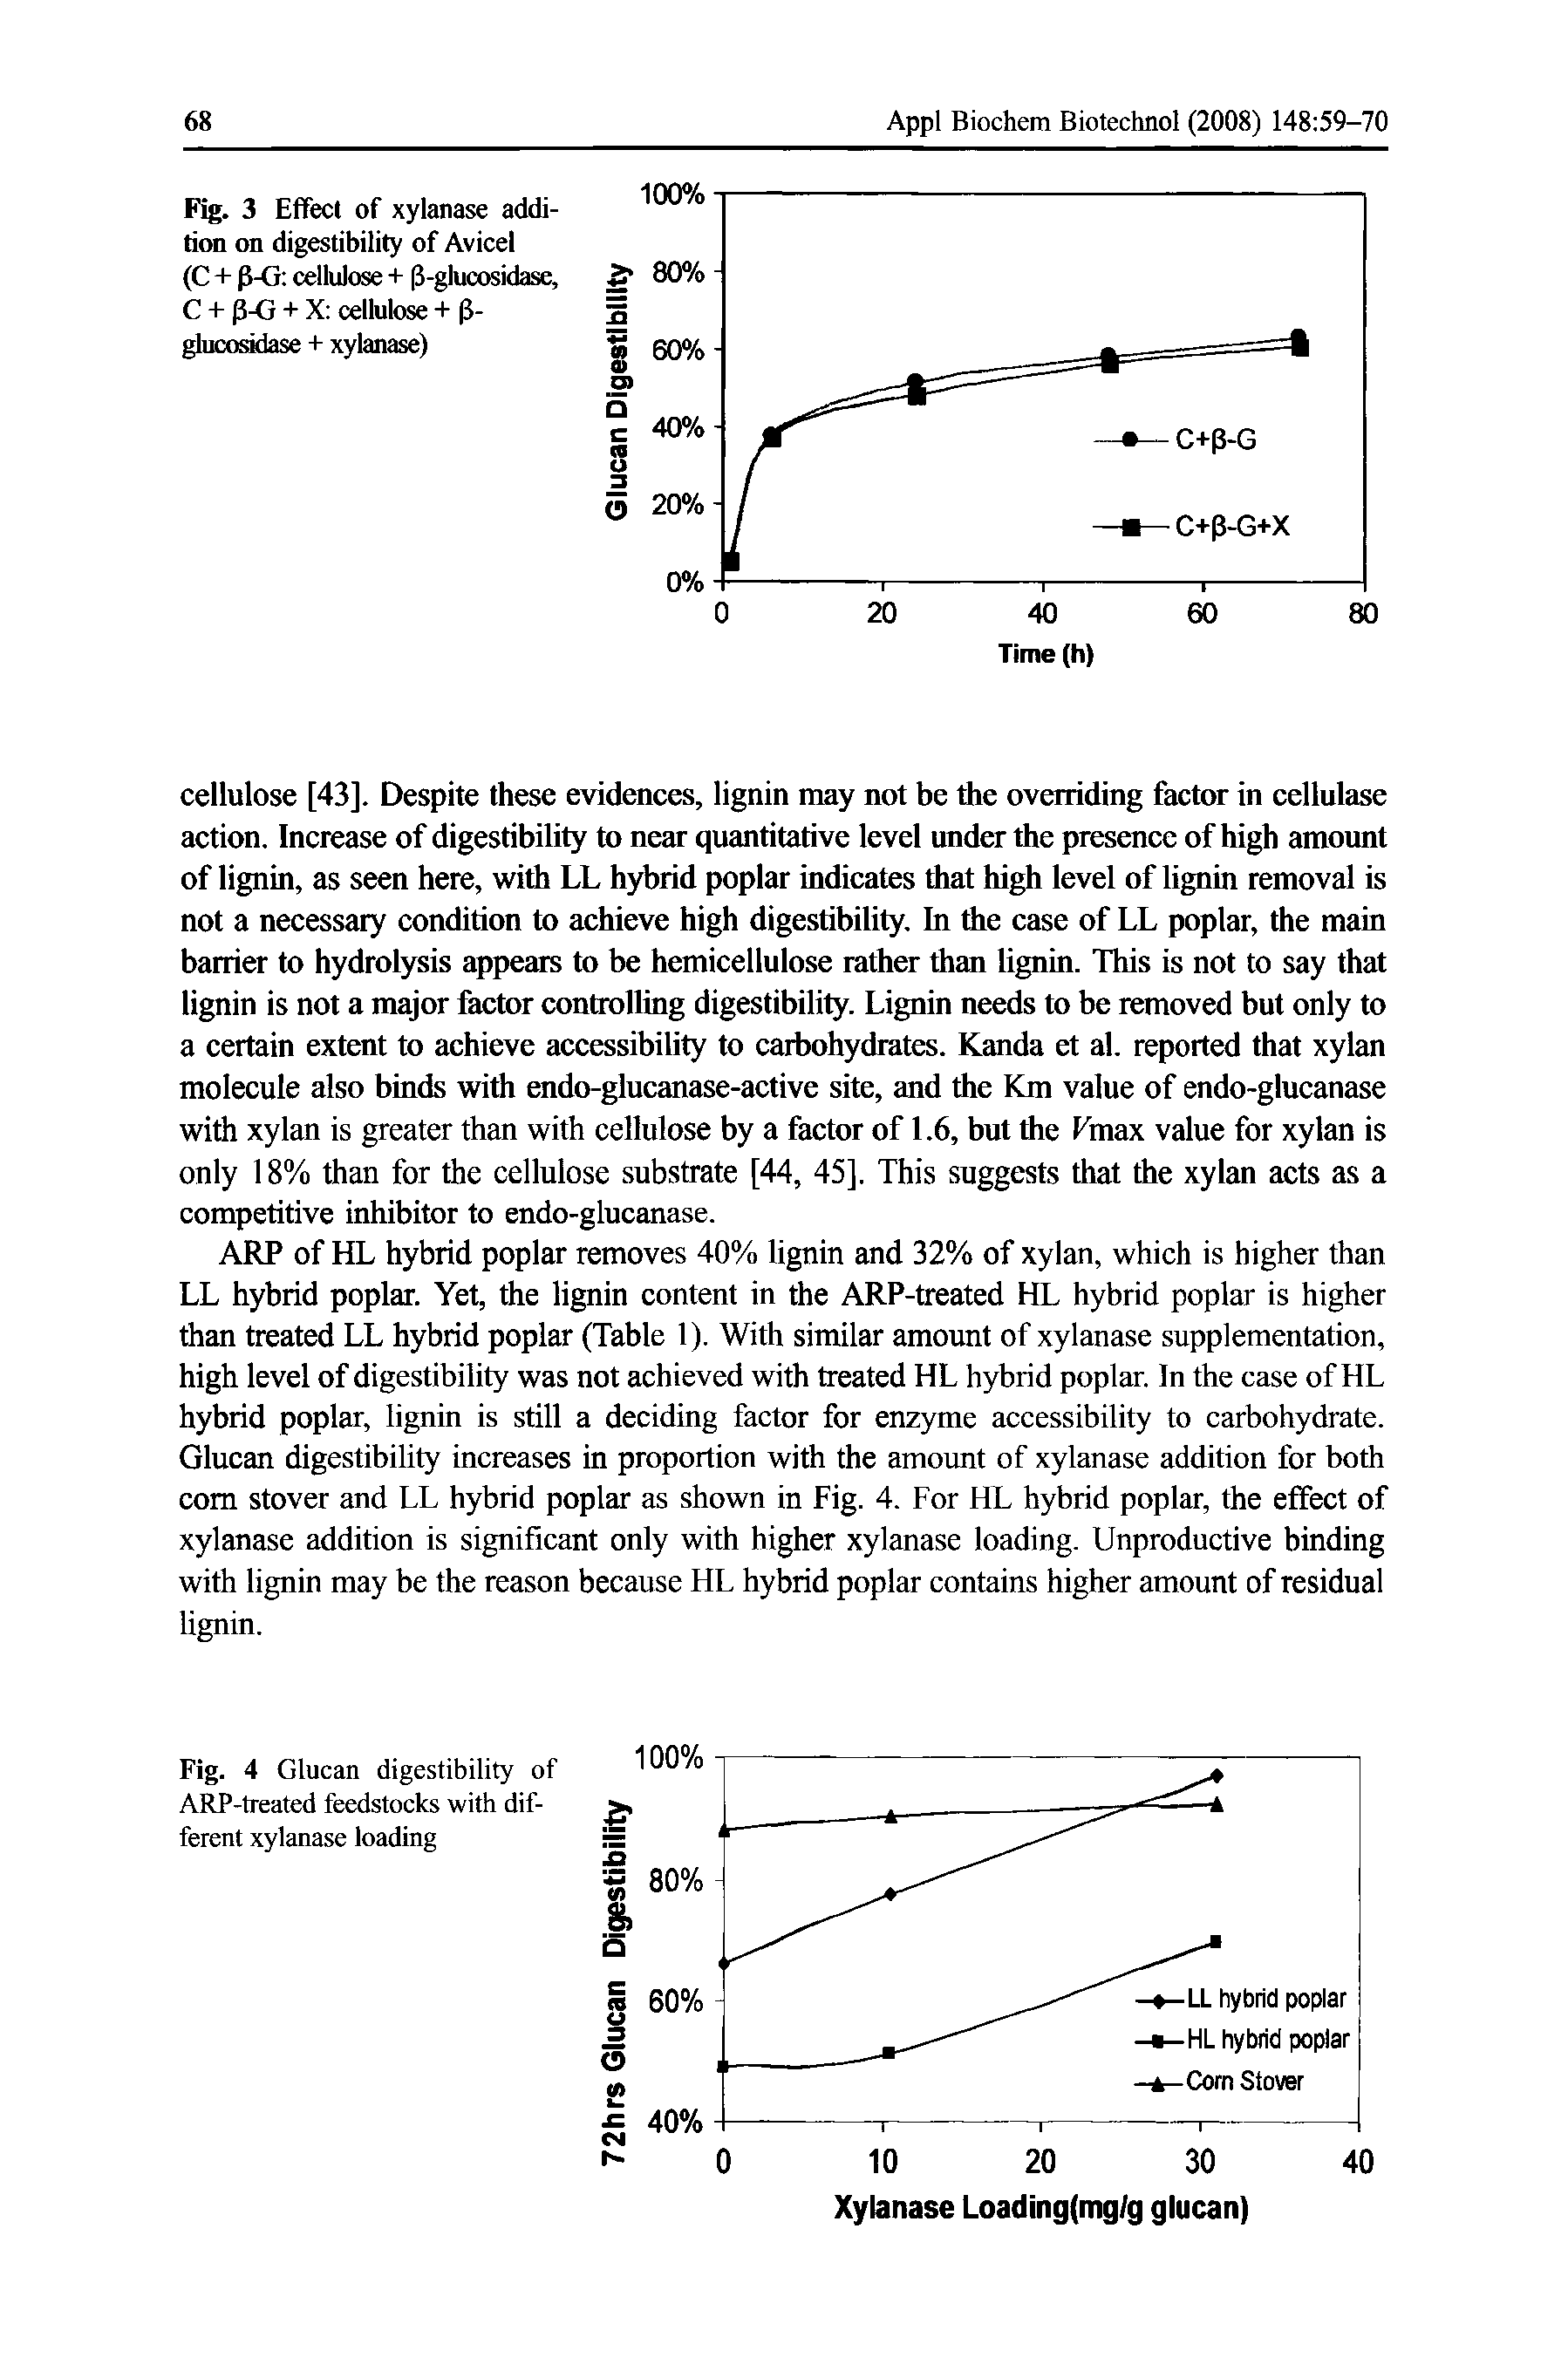 Fig. 3 Effect of xylanase addition on digestibility of Avicel (C + P-G cellulose + p-glucosidase, C + P-G + X cellulose + P-glucosidase + xylanase)...